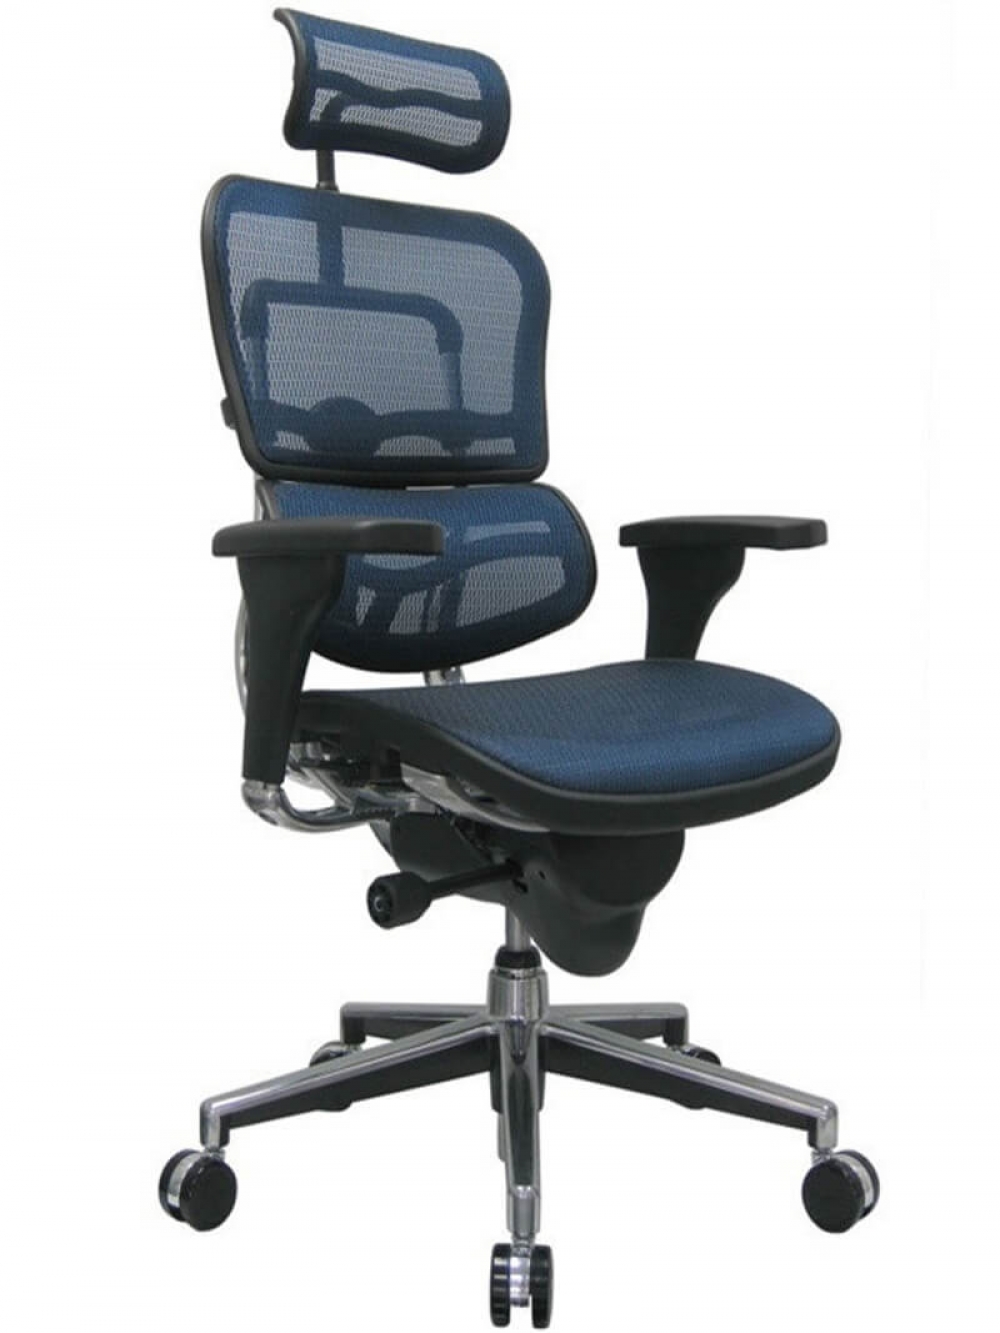 Executive chairs and conference chairs cub me7erg km 15 eur